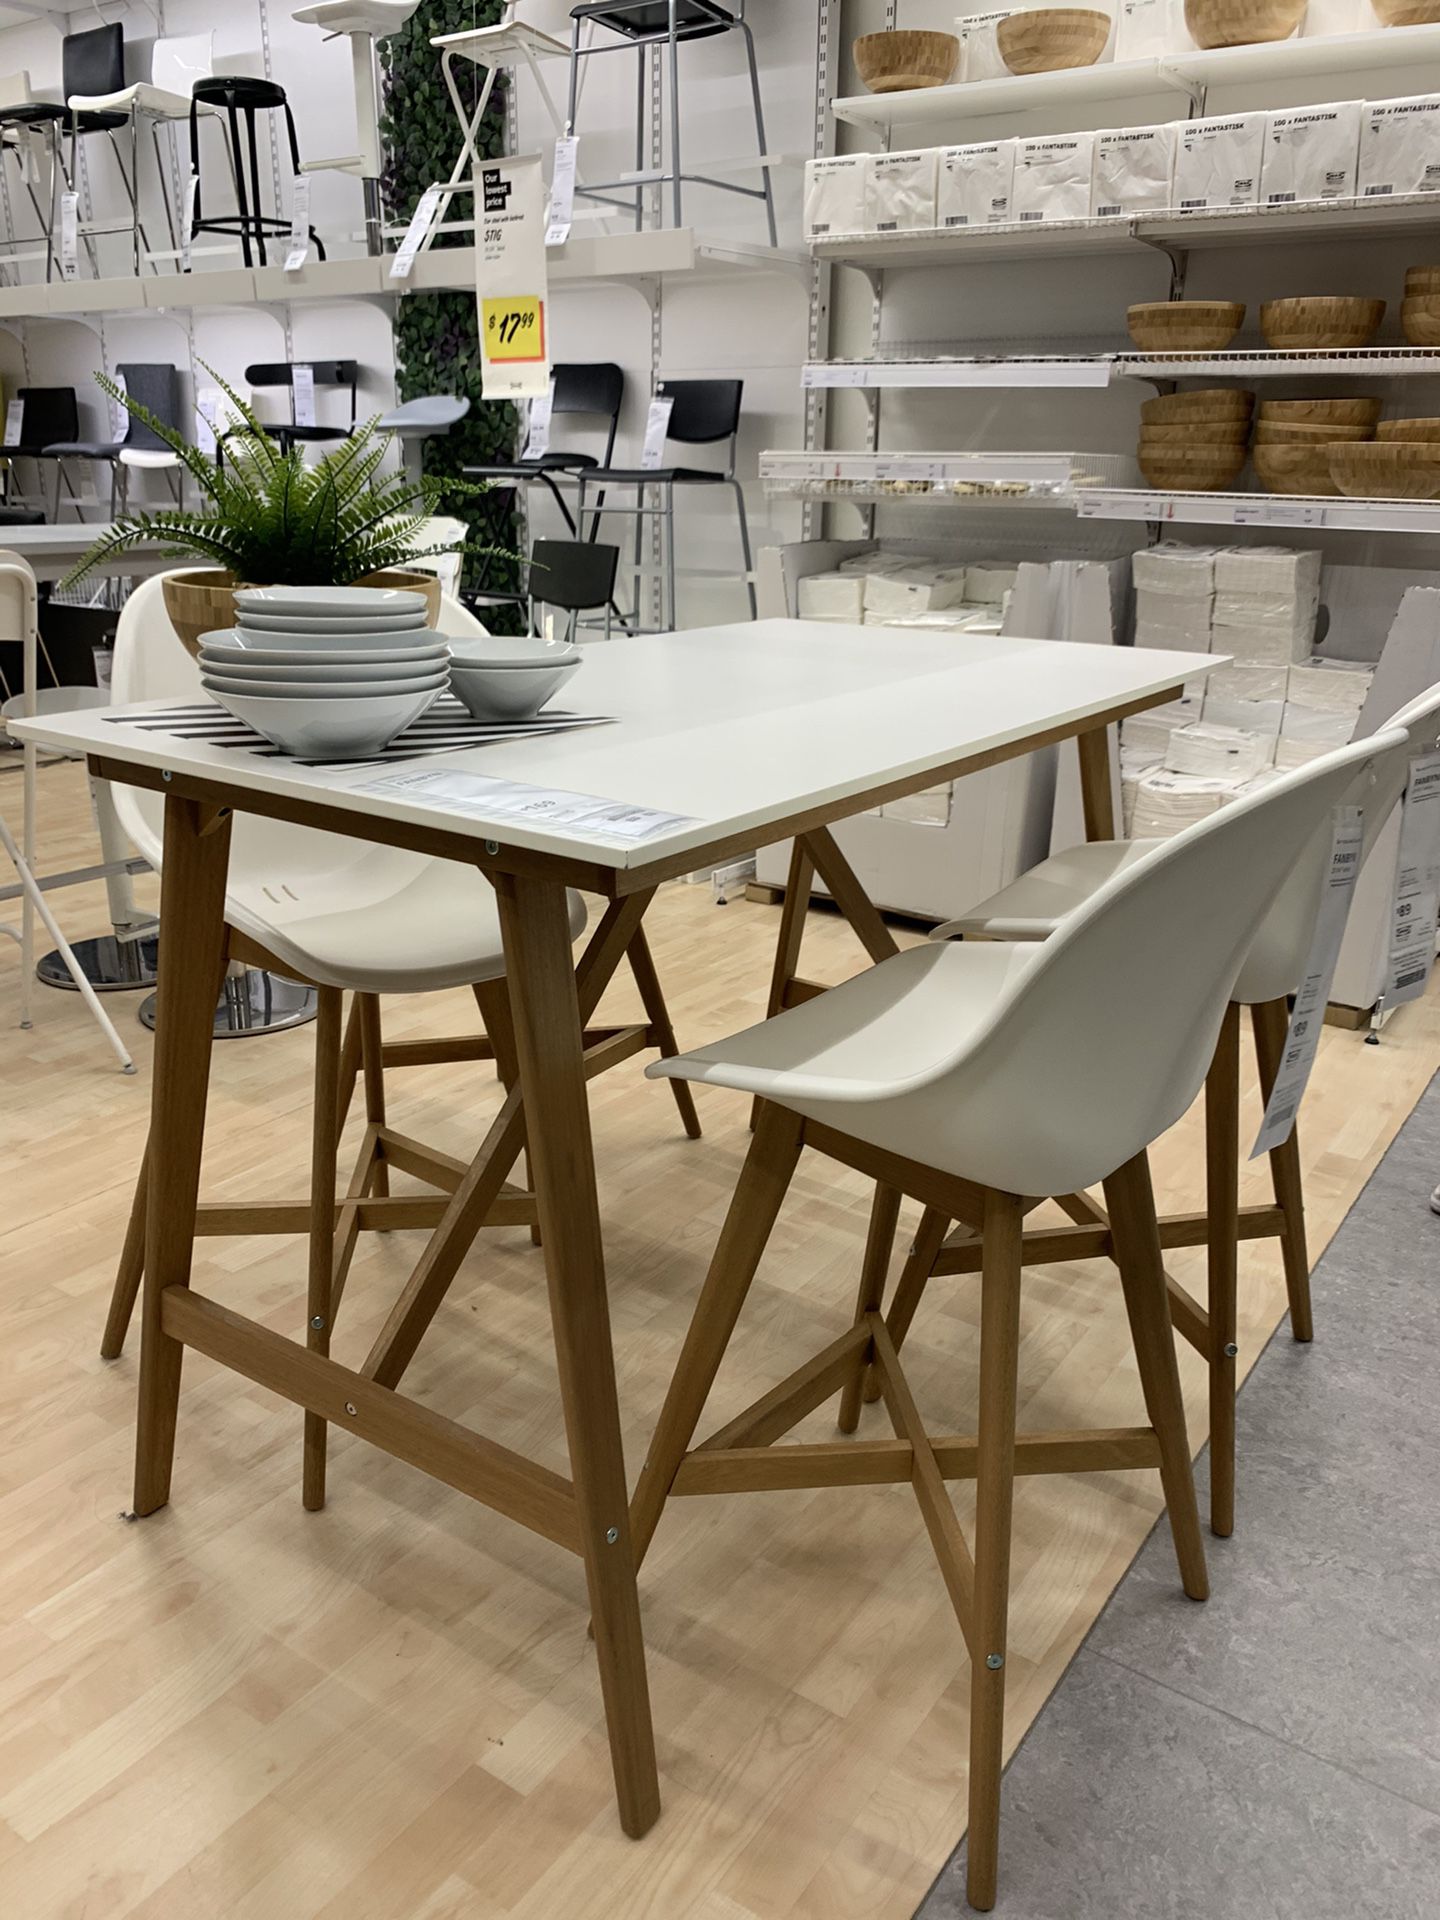 White IKEA Dining table no chairs